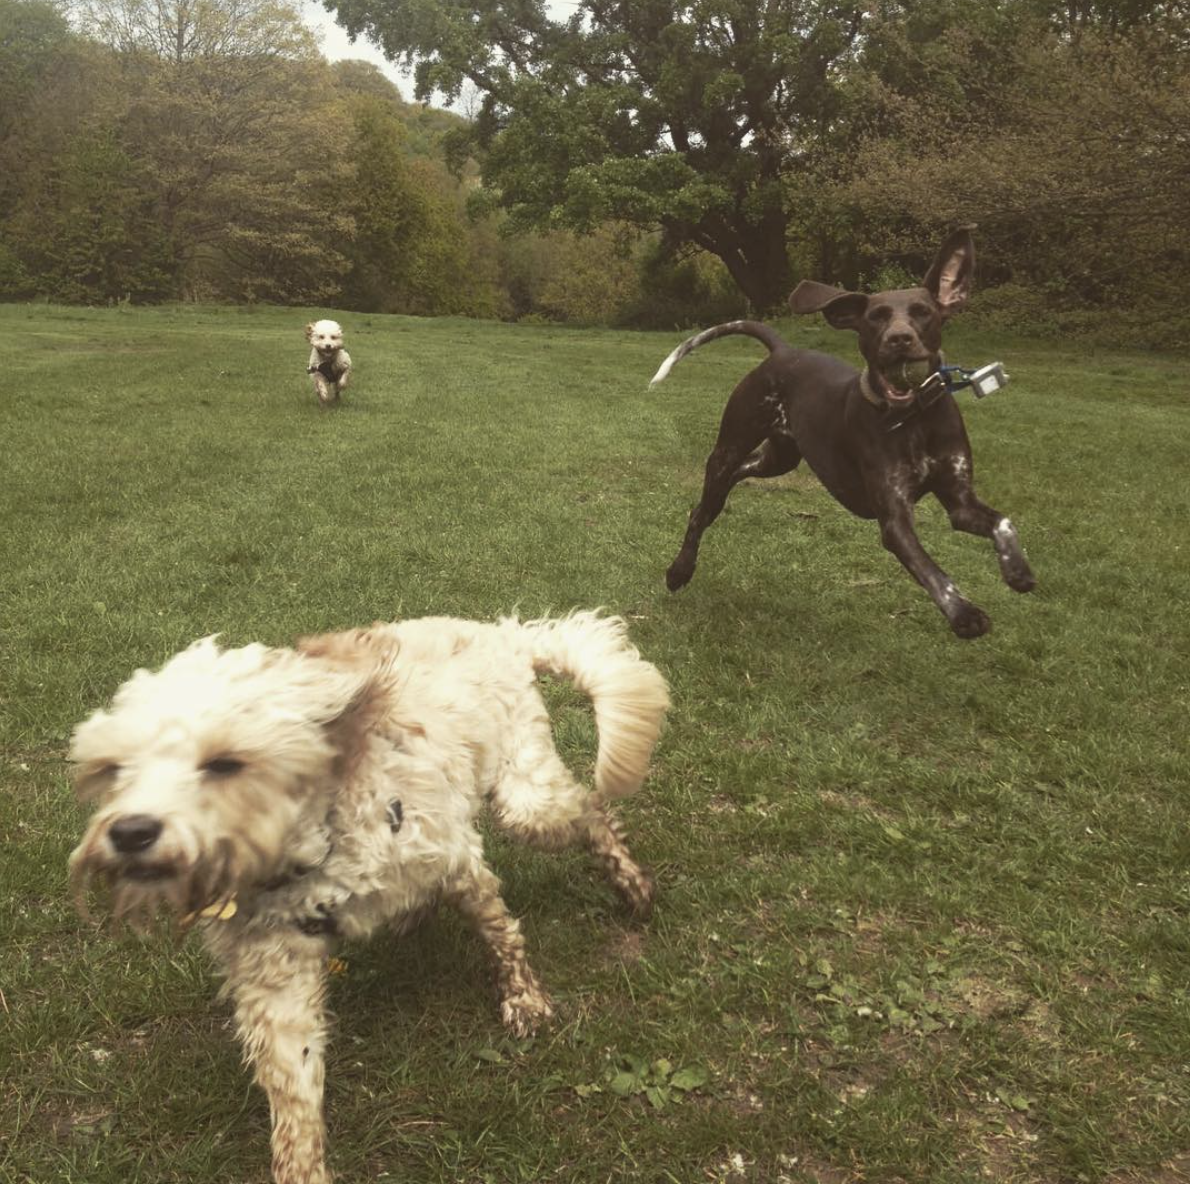 Dogs chasing each other.